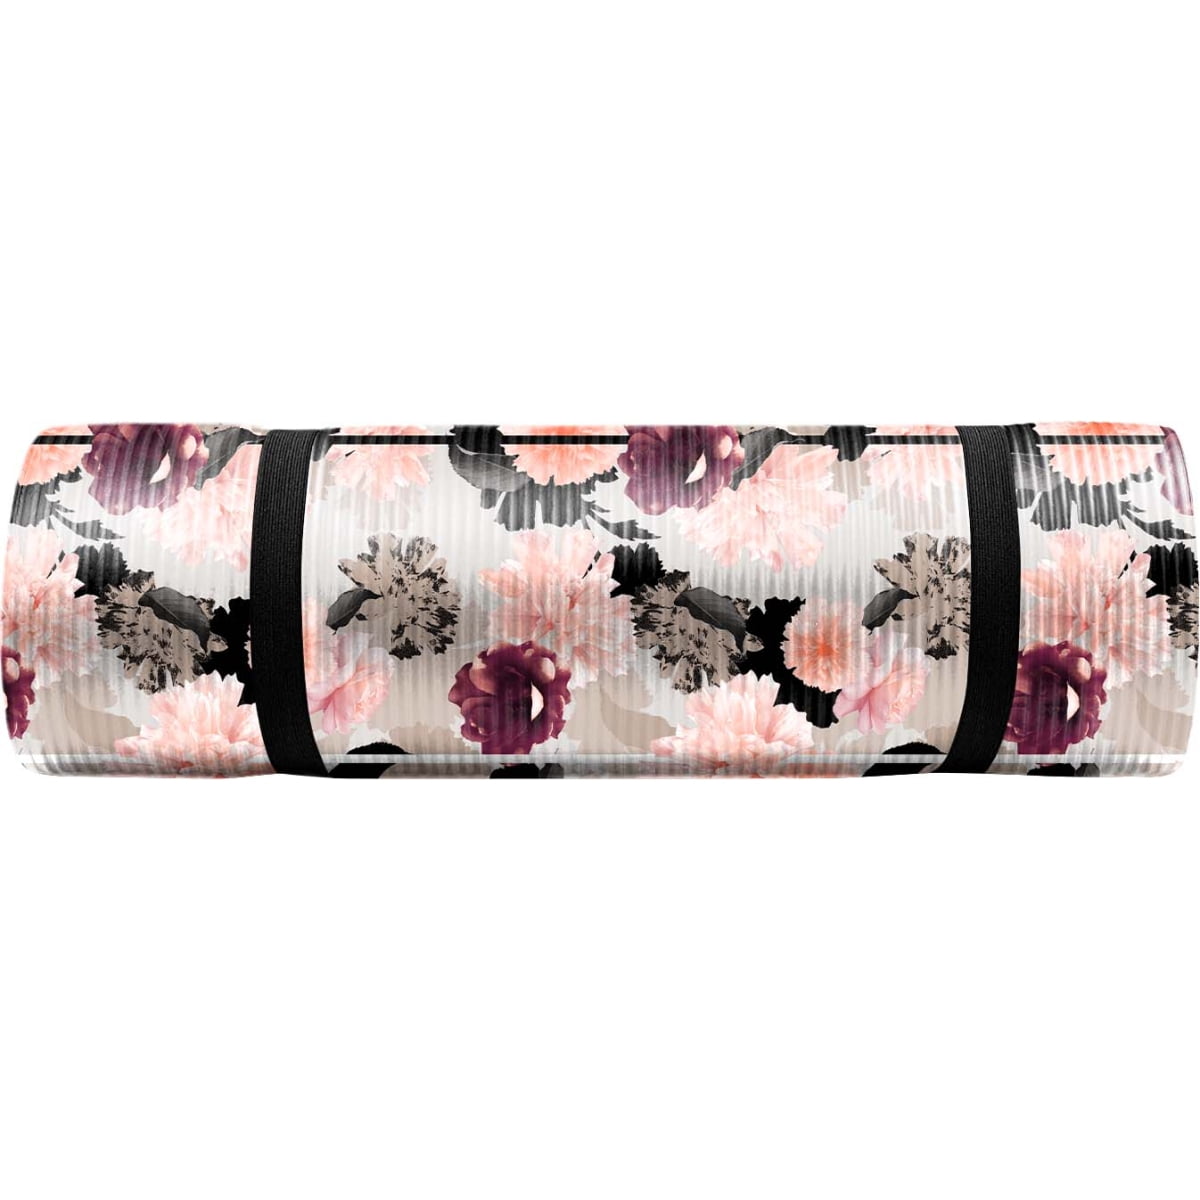 Jessica Simpson Extra Thick Fitness Yoga Mat with Carrying Strap, Floral 